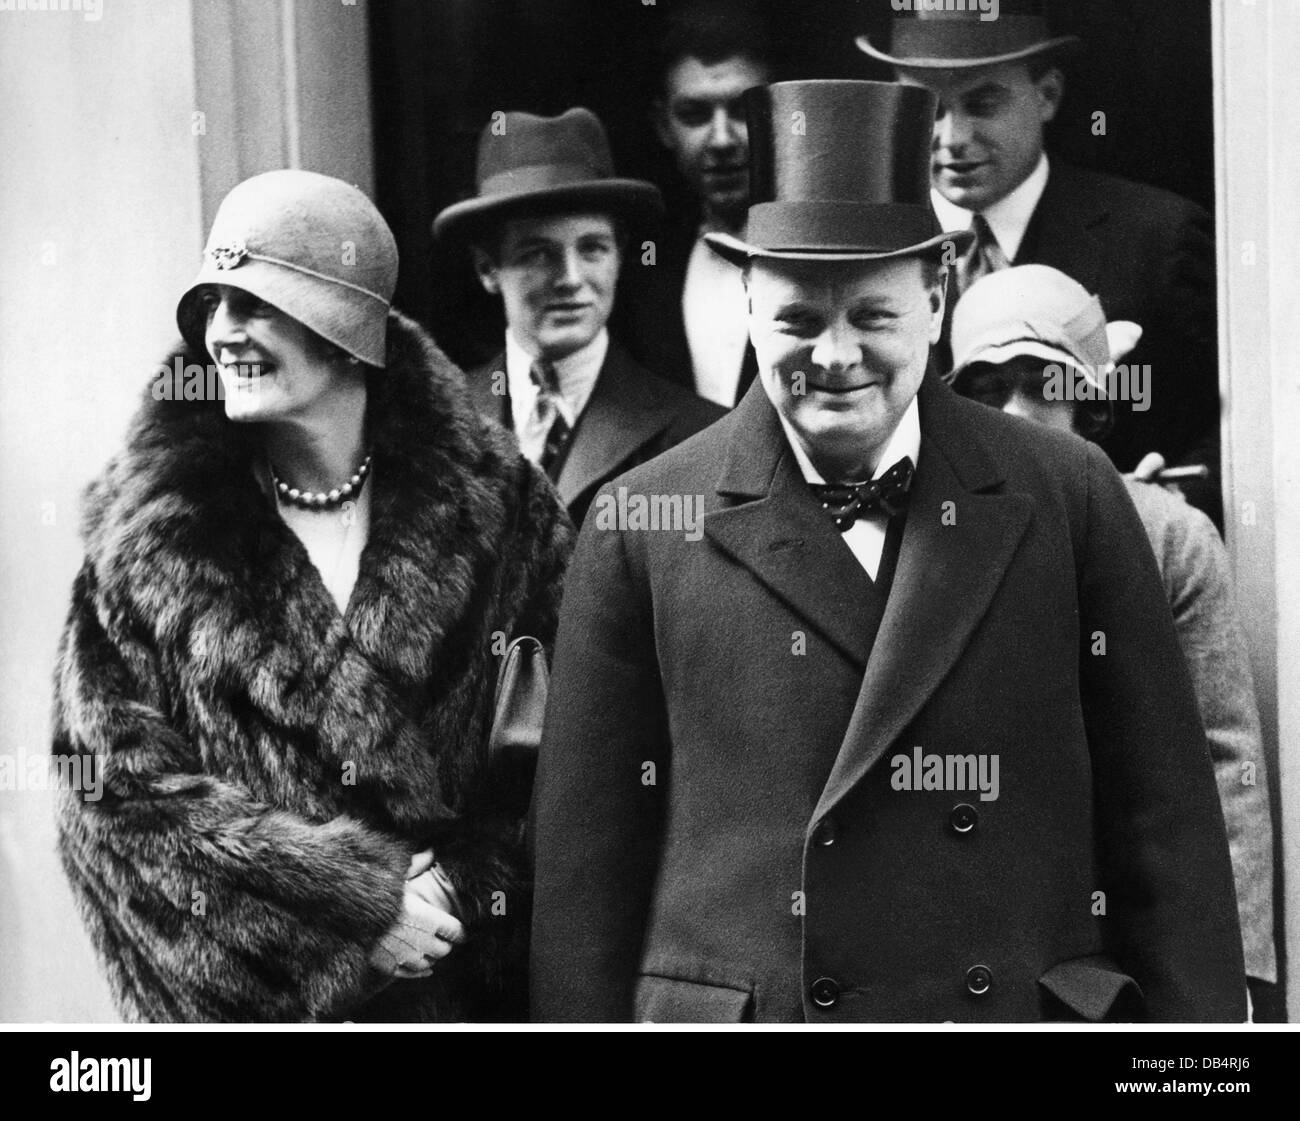 Churchill, Winston Spencer, 30.11.1874 - 24.1.1965, British politician (Cons.), Chancellor of the Exchequer 6.11.1924 - 4.6.1929, with wife Clementine, 1925, Stock Photo